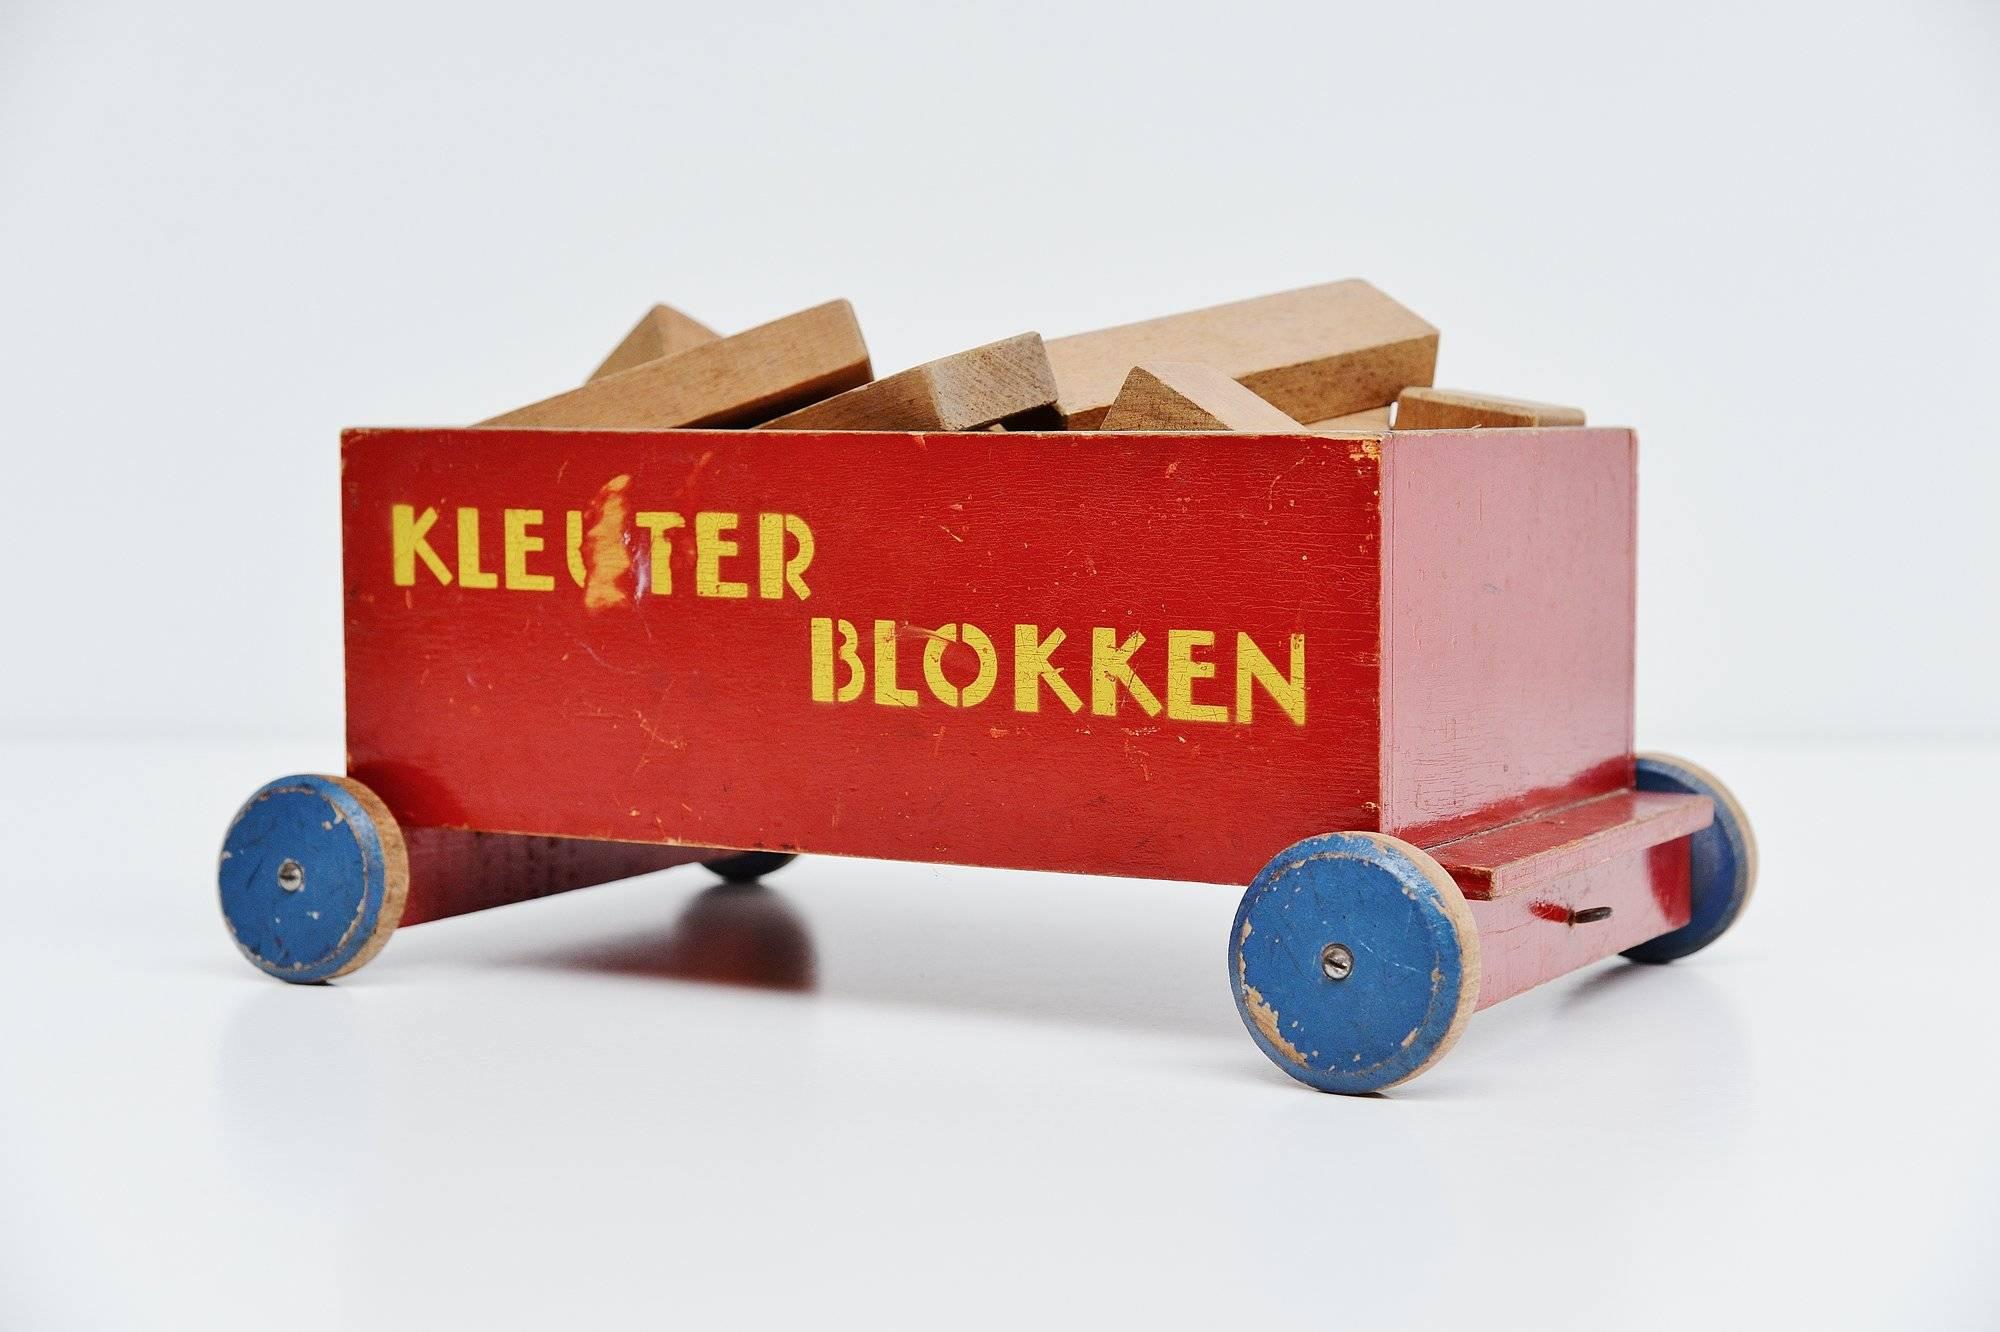 Very nice decorative toy ‘kleuterblokken’ (kids cubes) cart designed by Ko Verzuu for Ado Holland in 1935. Ado means Arbeid door onvolwaardigen, translated; labor by incapacitated, which makes this an even more special piece. Toys by Ado are being